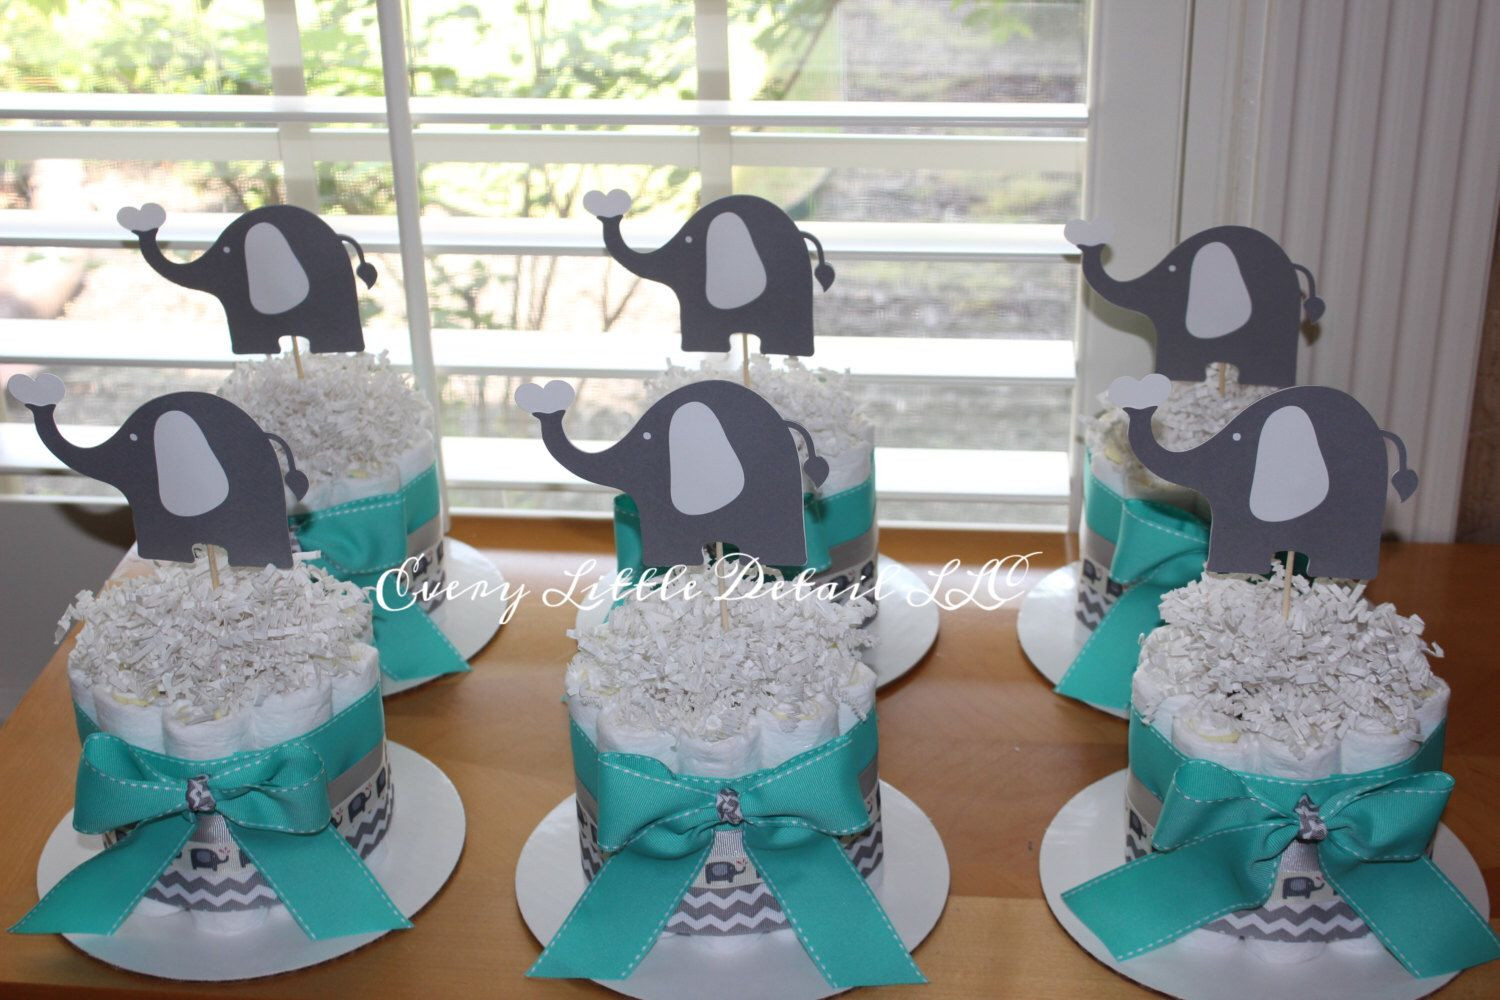 Elephant Baby Shower Decorations DIY
 Pin by Mia Buntin on baby shower